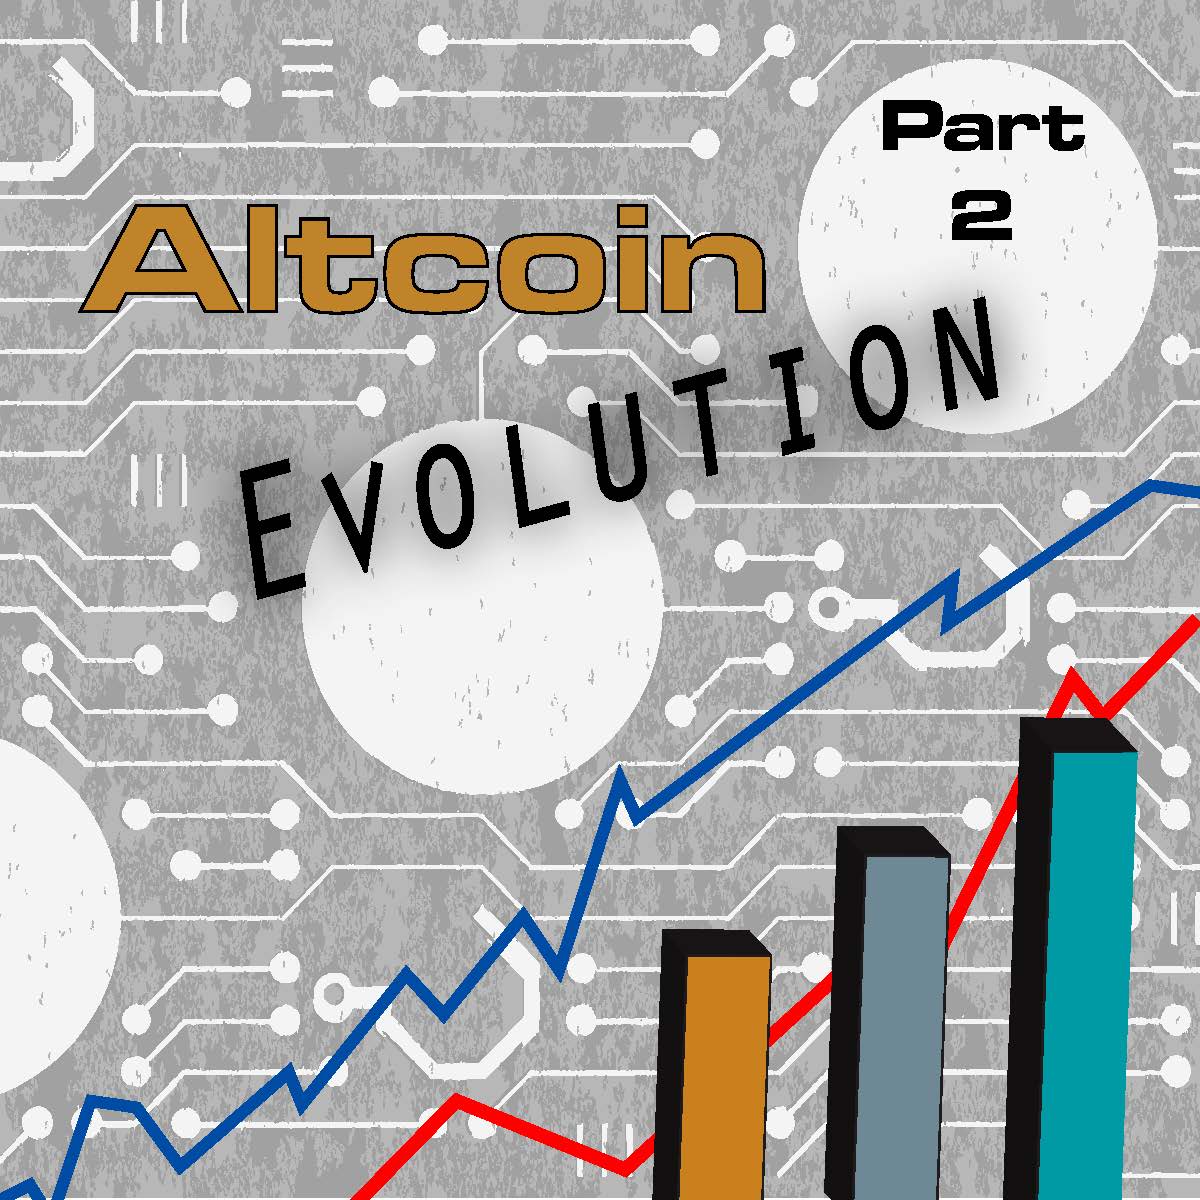 The Altcoin Evolution: Part II